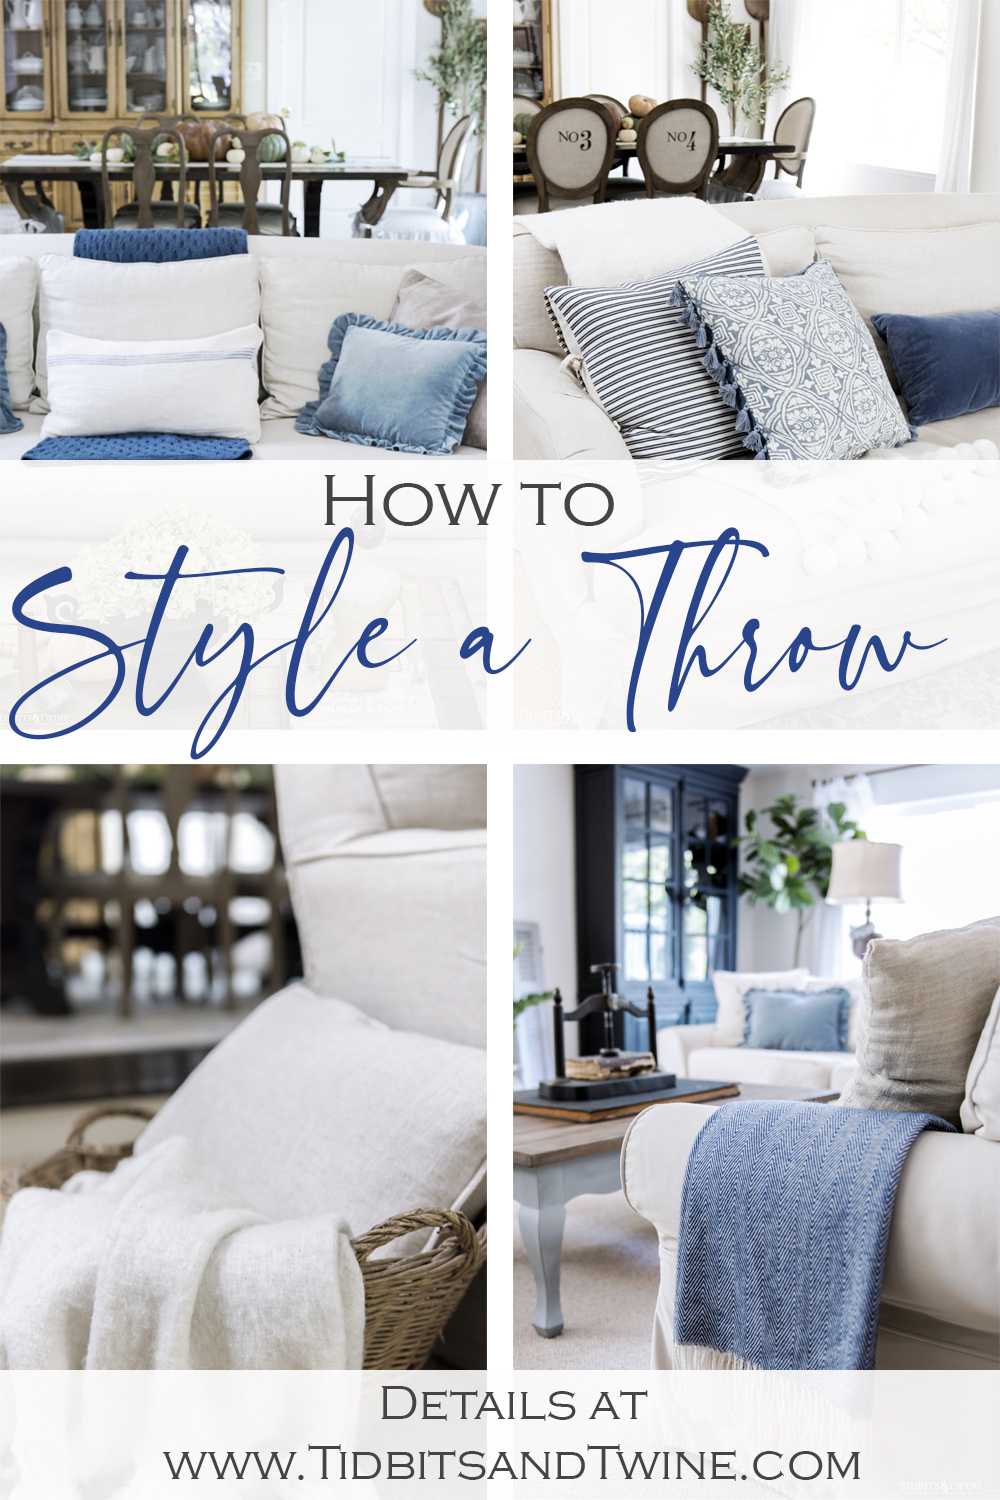 pinterest image showing four images and text that reads how to style a throw